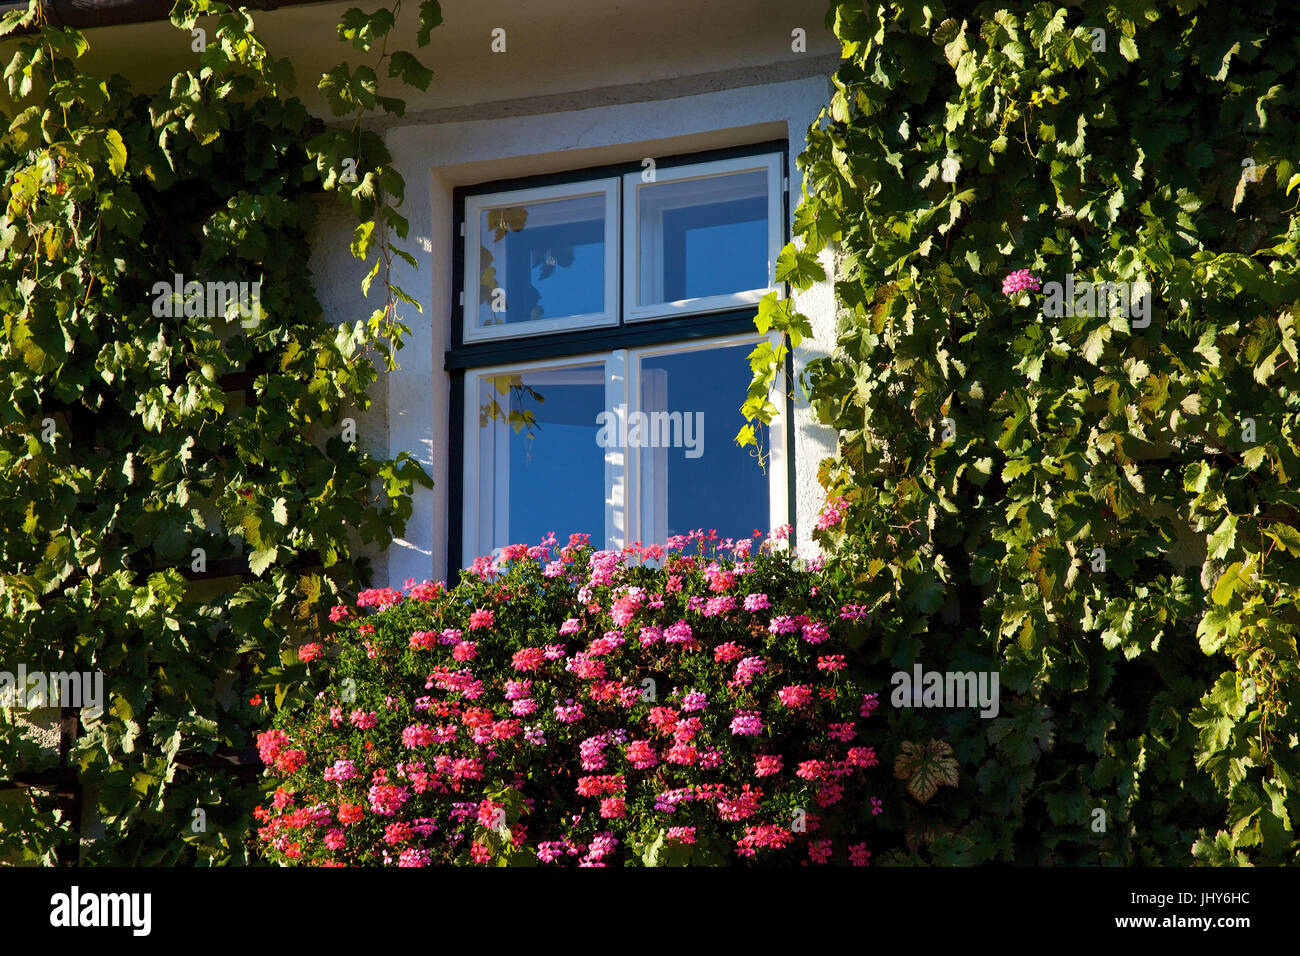 Flower-decorated window in spitz / the Danube, Austria, Lower Austria, Wachau - Window in spitz / the Danube, Austria, Lower Austria, Wachau region, B Stock Photo